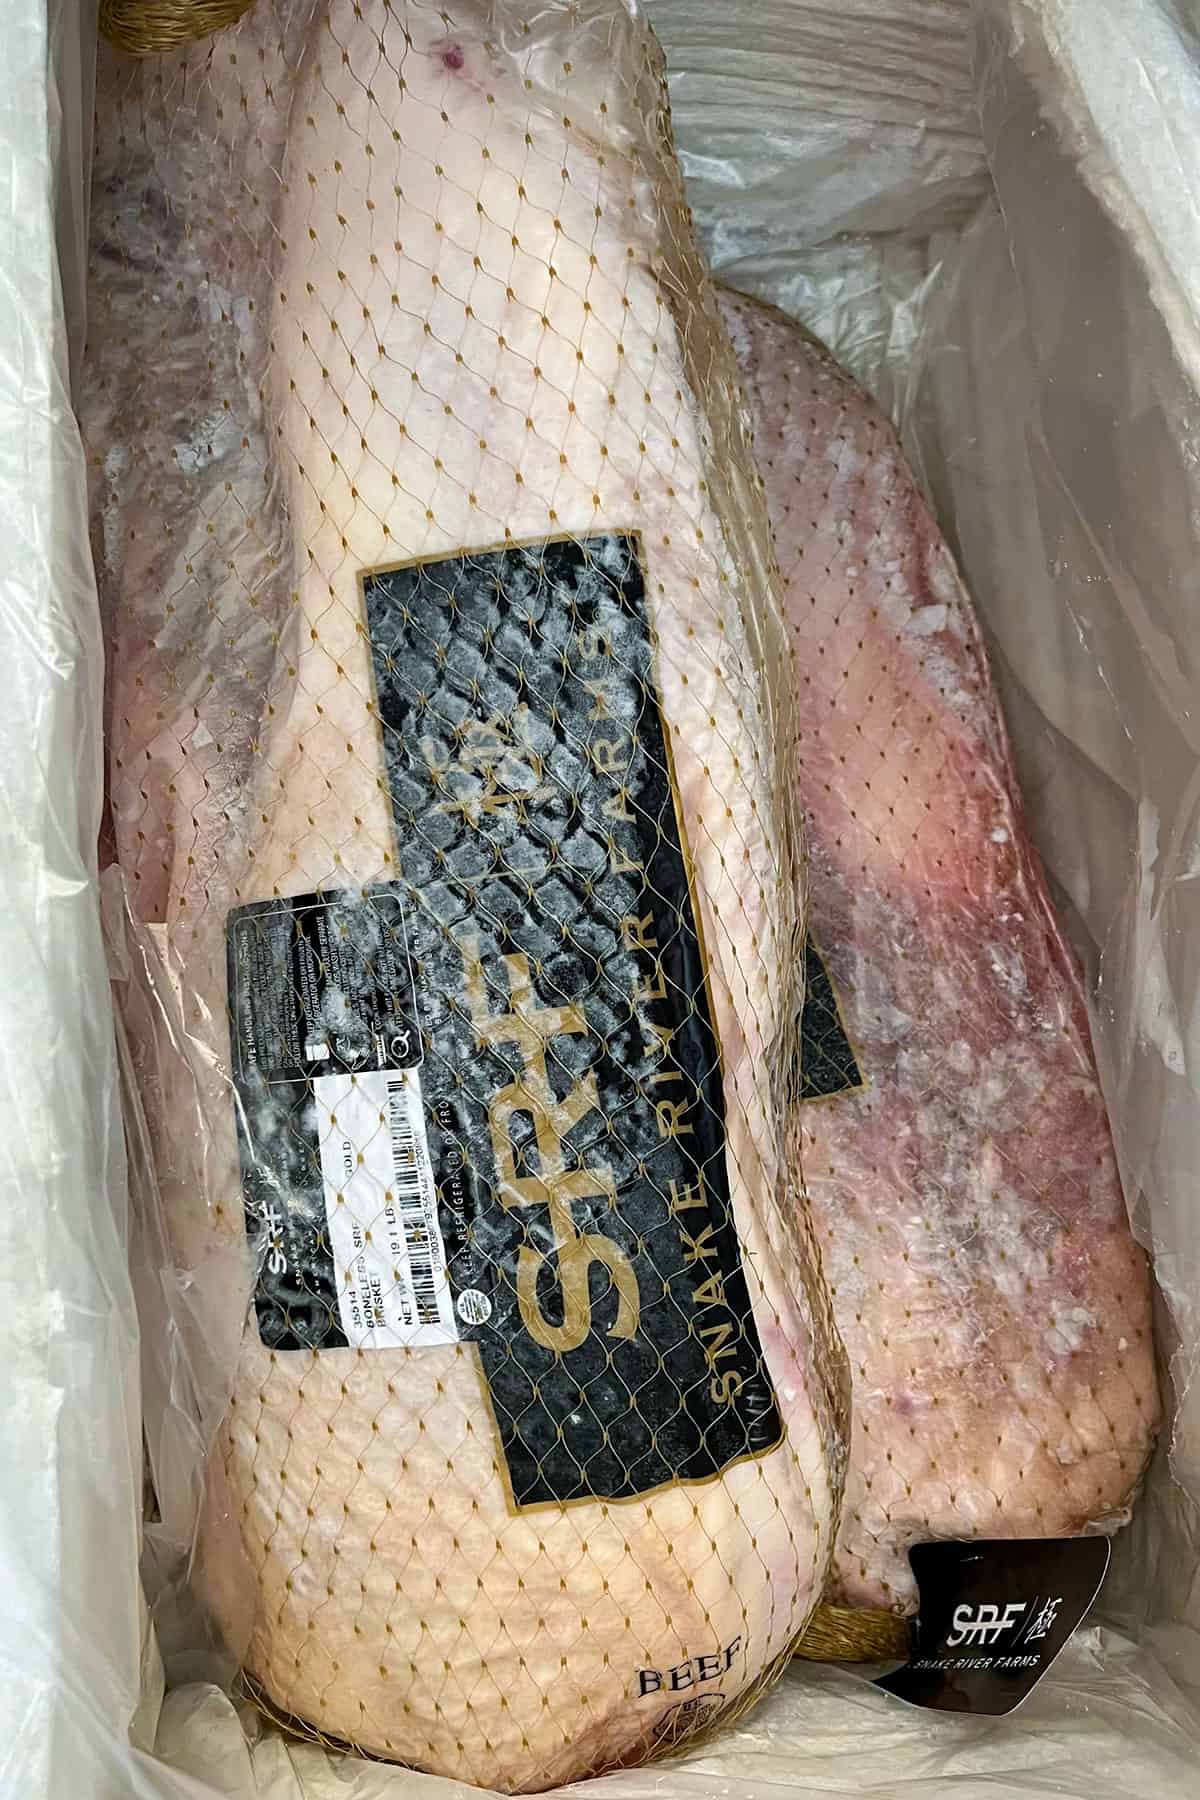 two frozen briskets delivered in a box.